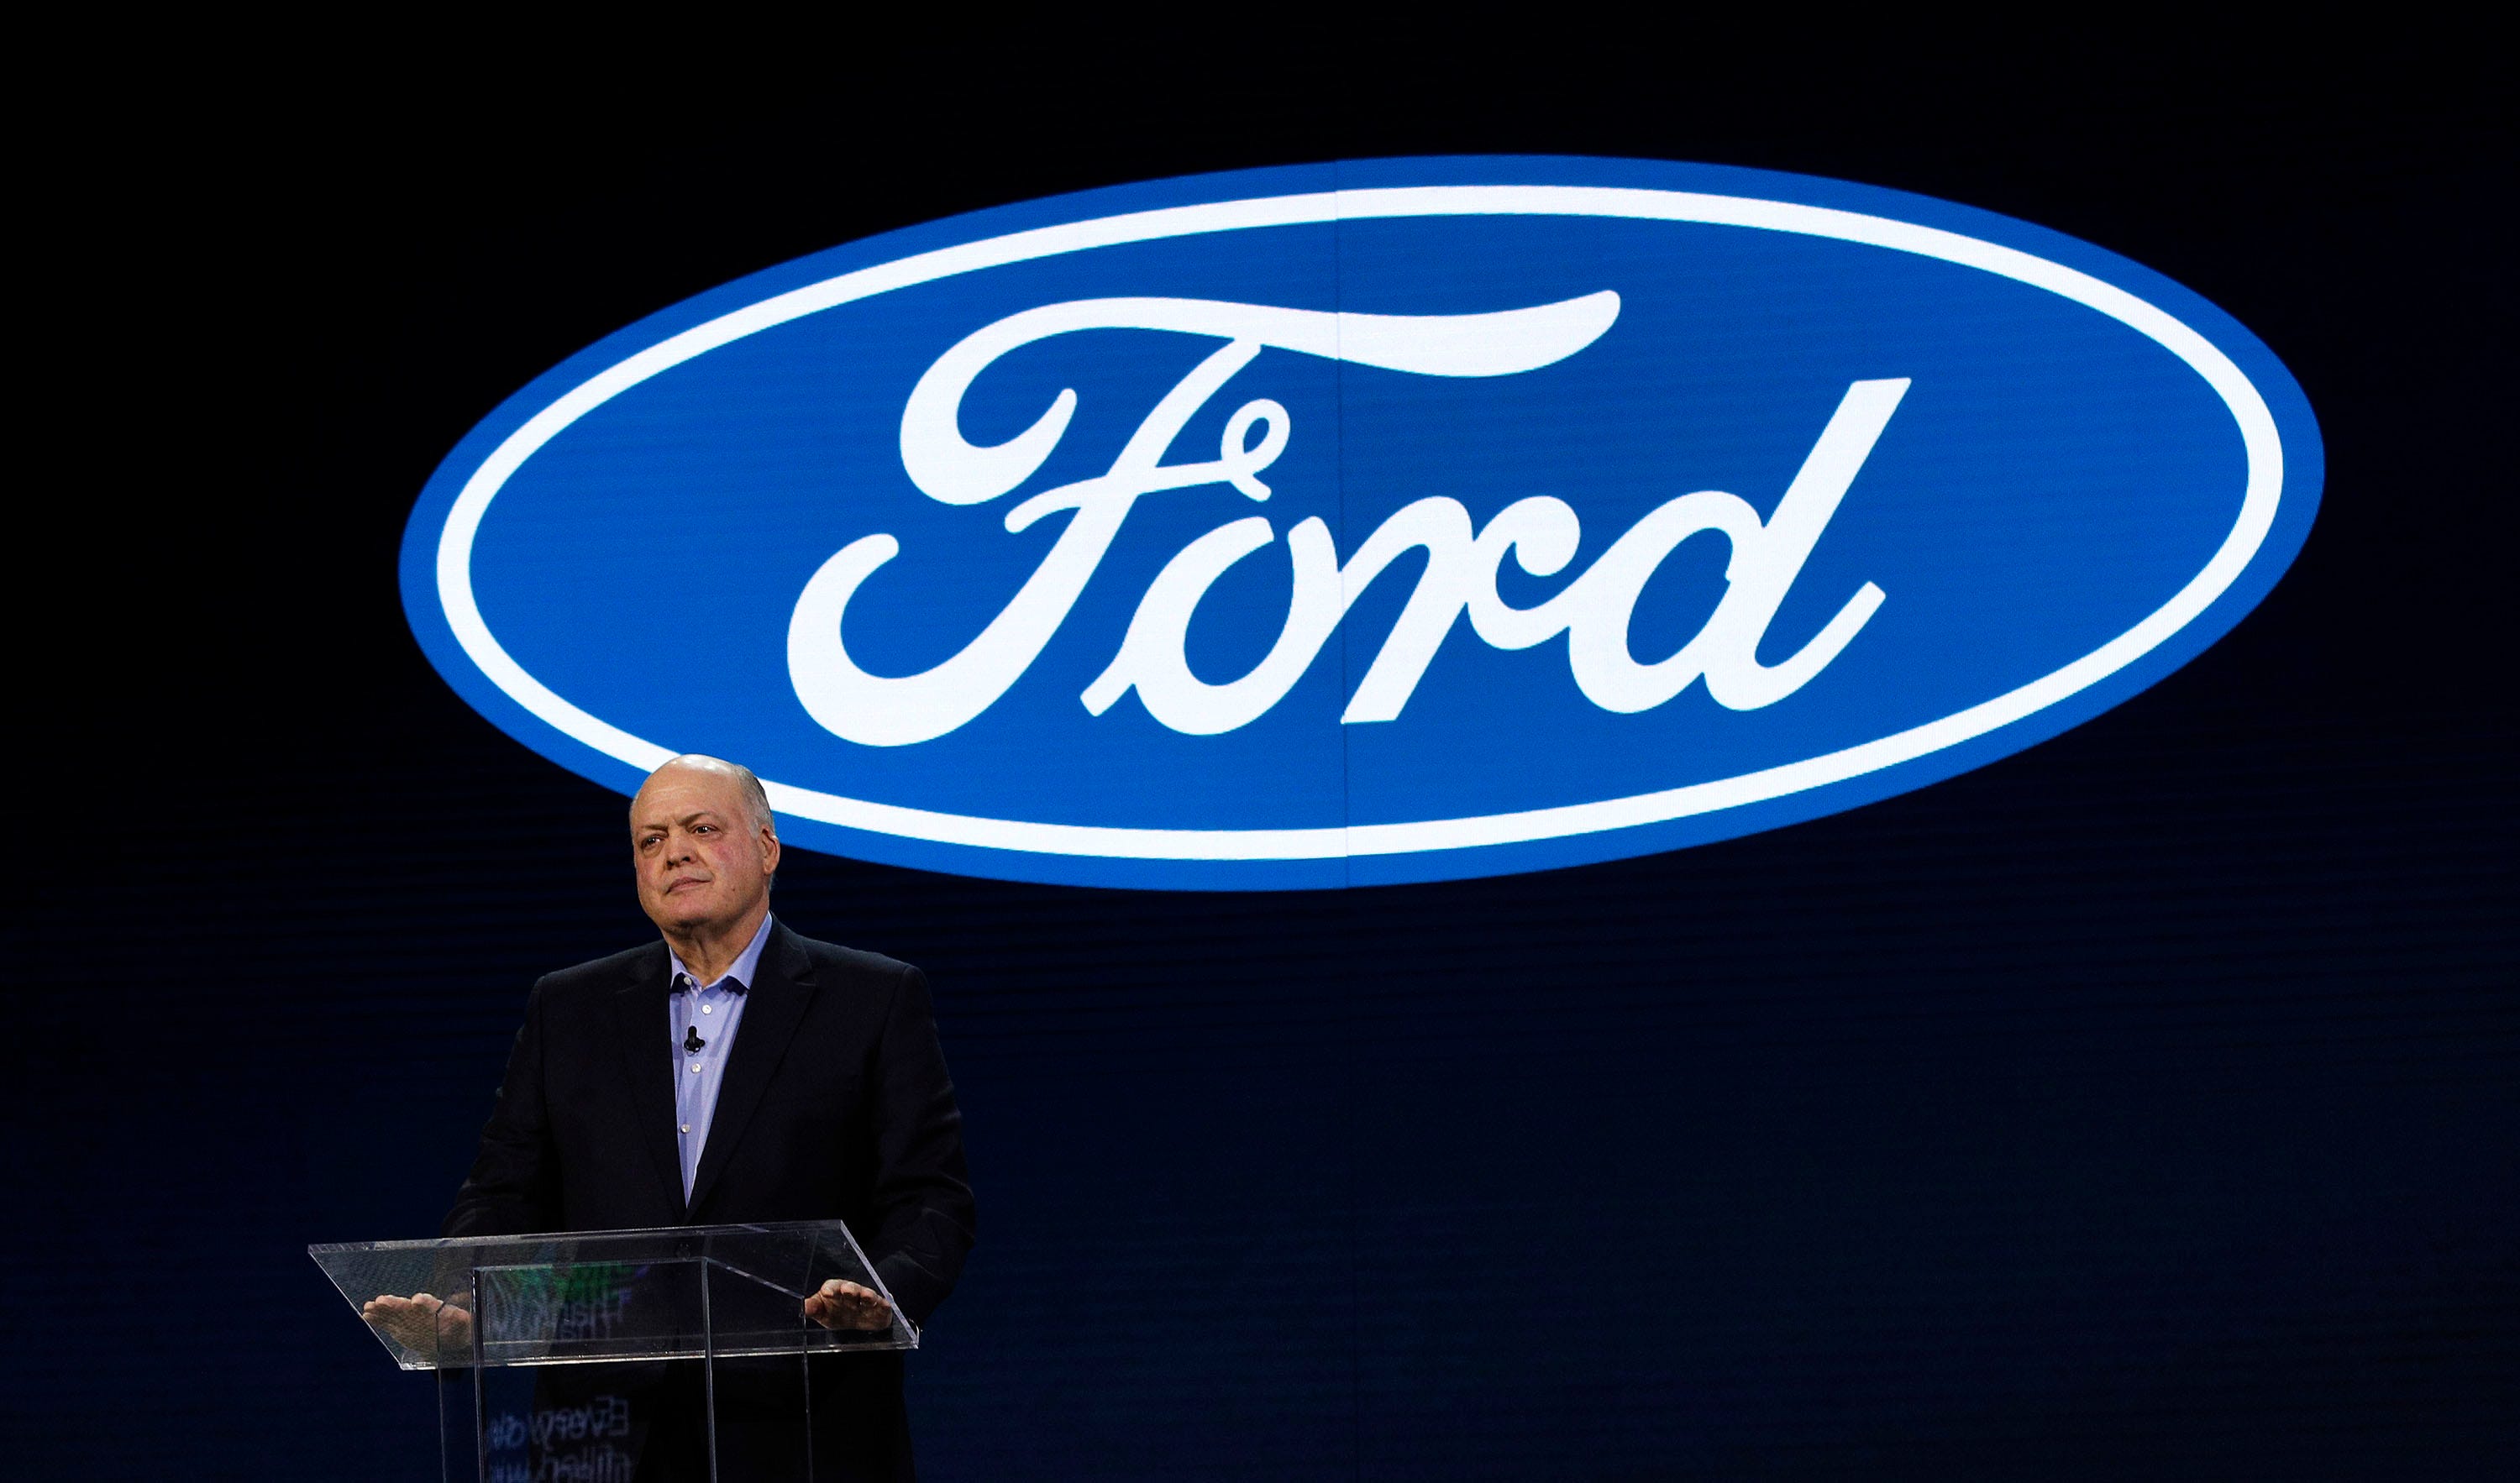 Ford Motor Co. will notify 500 salaried employees in North America on Tuesday that their positions will be eliminated, CEO Jim Hackett said in a note to employees.